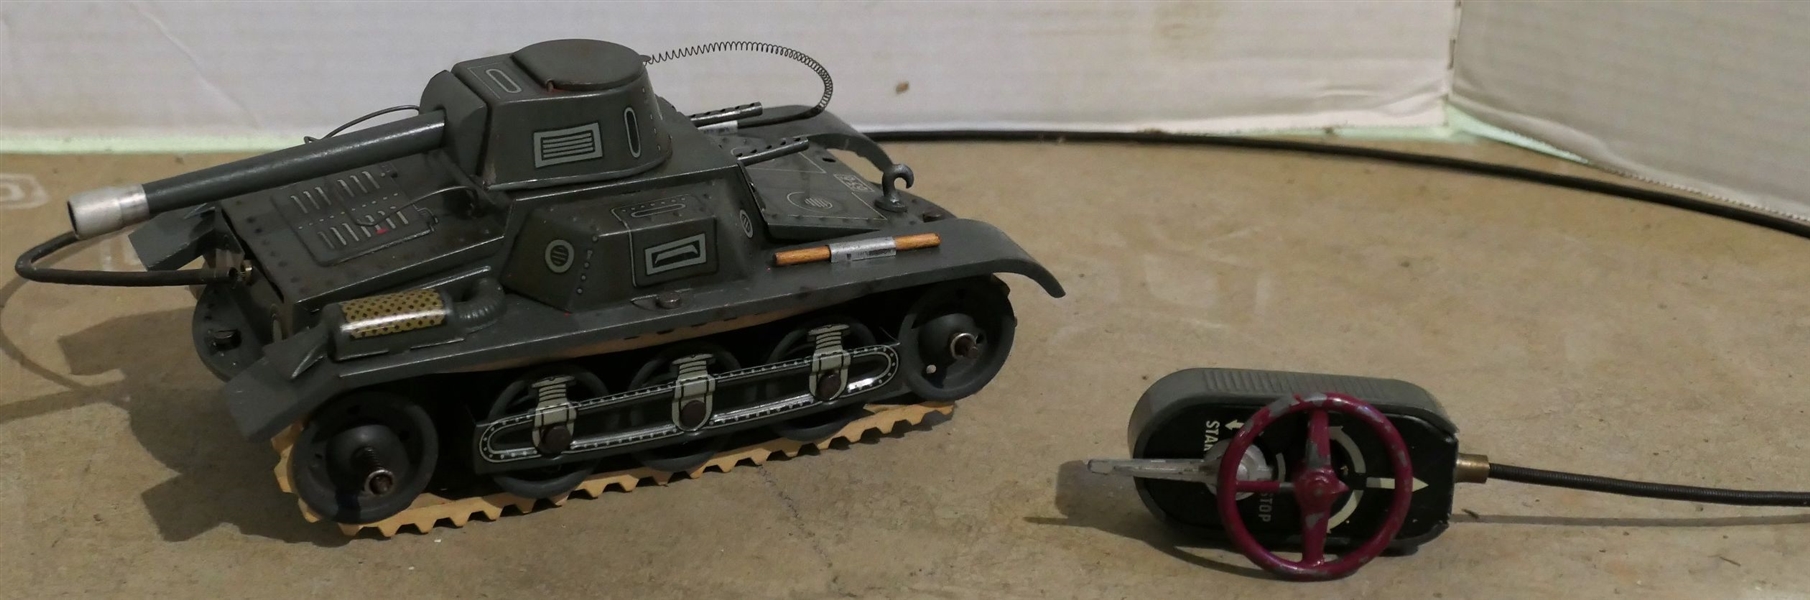 Gescha - Made in Western Germany - 65-6F - Battery Operated Remote Control Tank - Tin Litho - Rubber Track Wheels - Tank Measures 3" tall 8" by 4 1/2" 